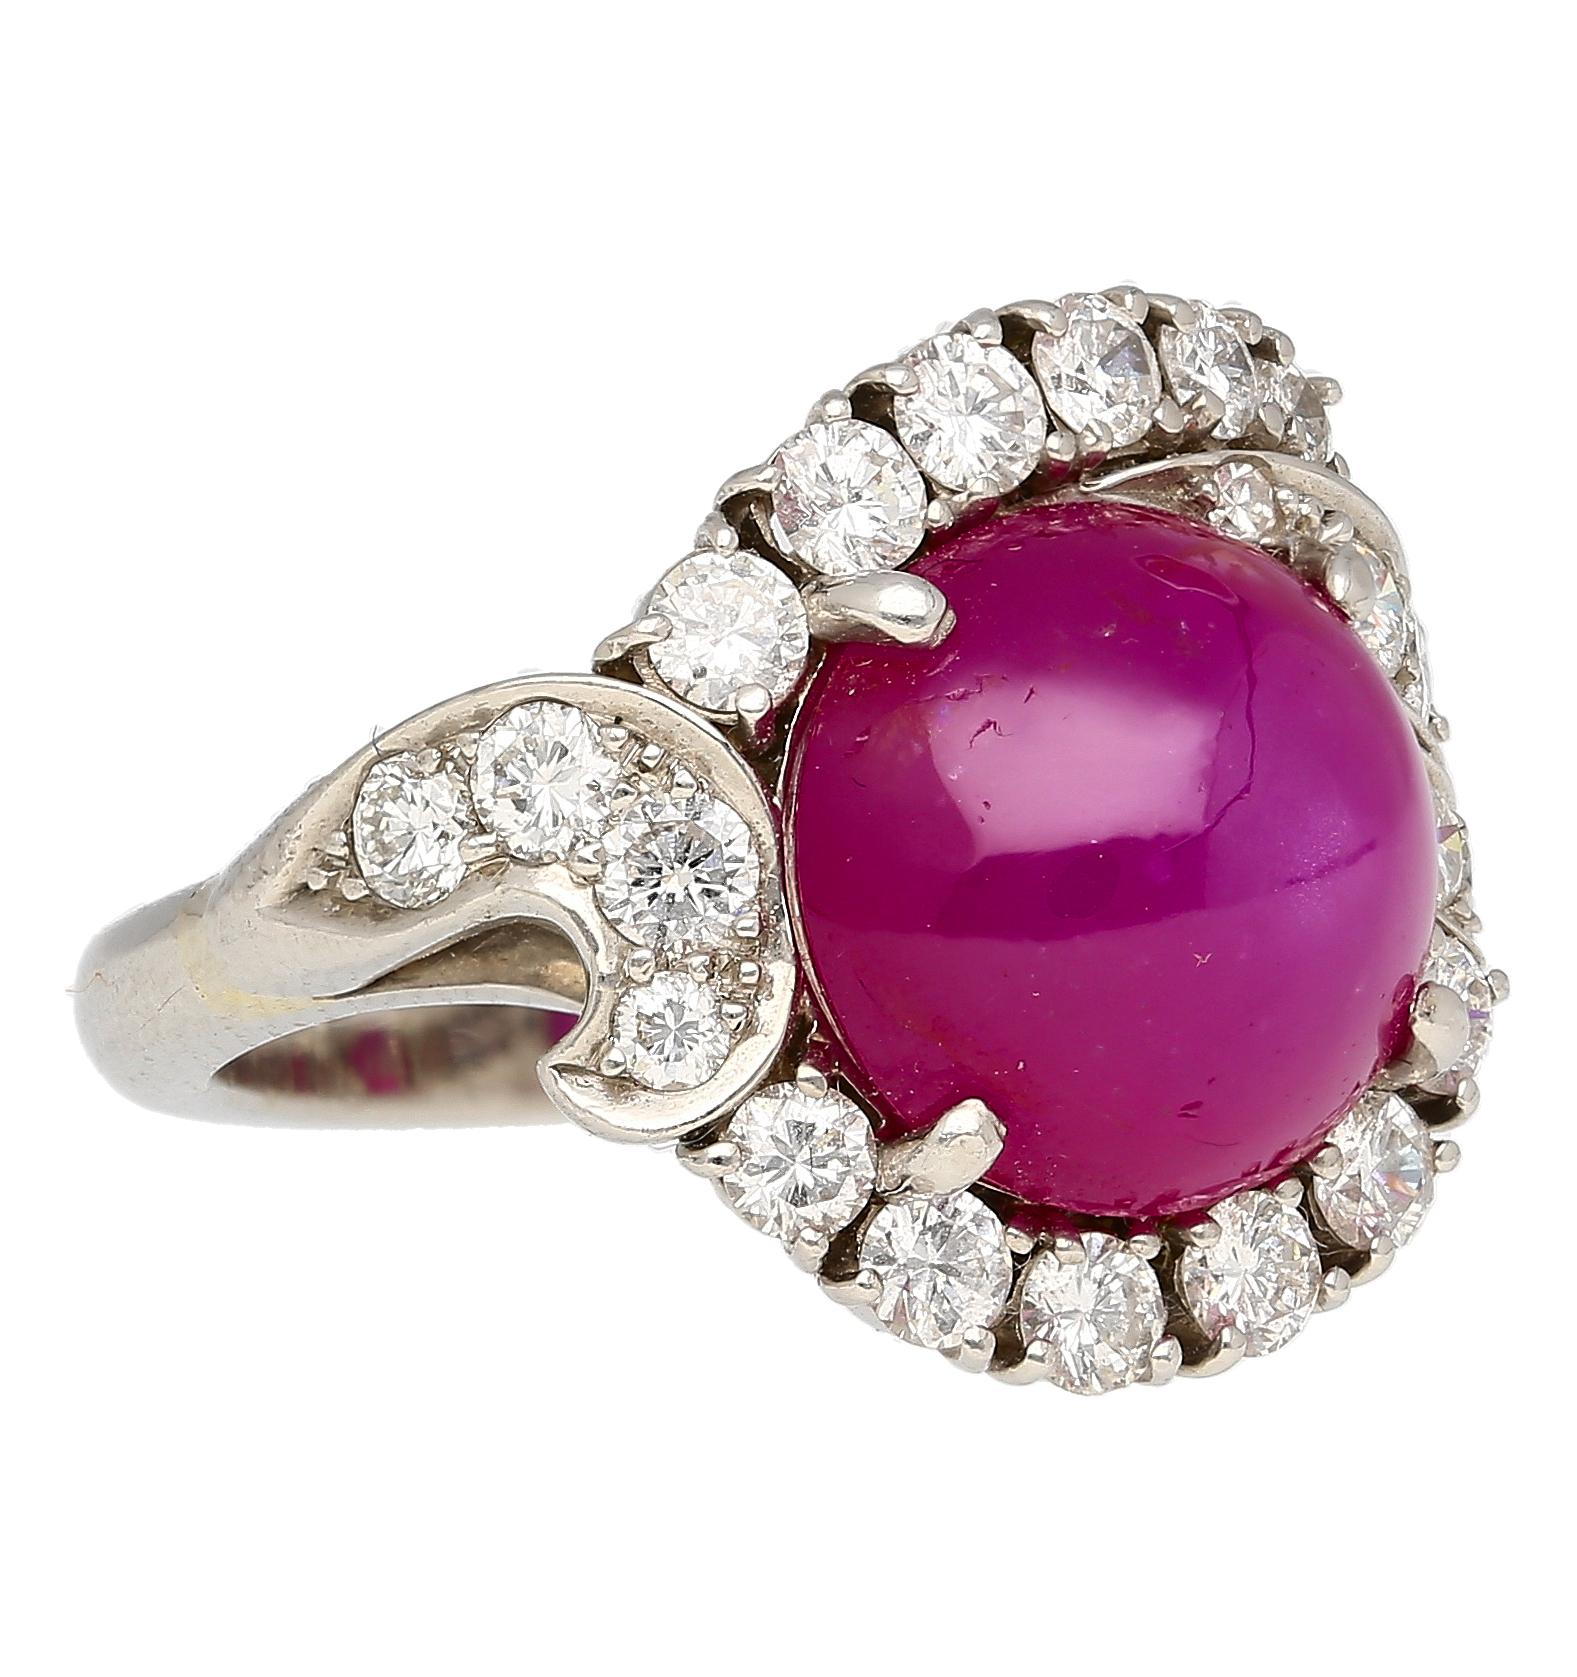 Vintage Retro Estate GRS Certified 6.01 Carat No Heat Vietnam Star Ruby & Diamond In Freeform Platinum Ring Setting. 

Paired are an additional 23 round-cut diamonds, surrounding the halo of the ruby and along the side of the ring shank. All set in